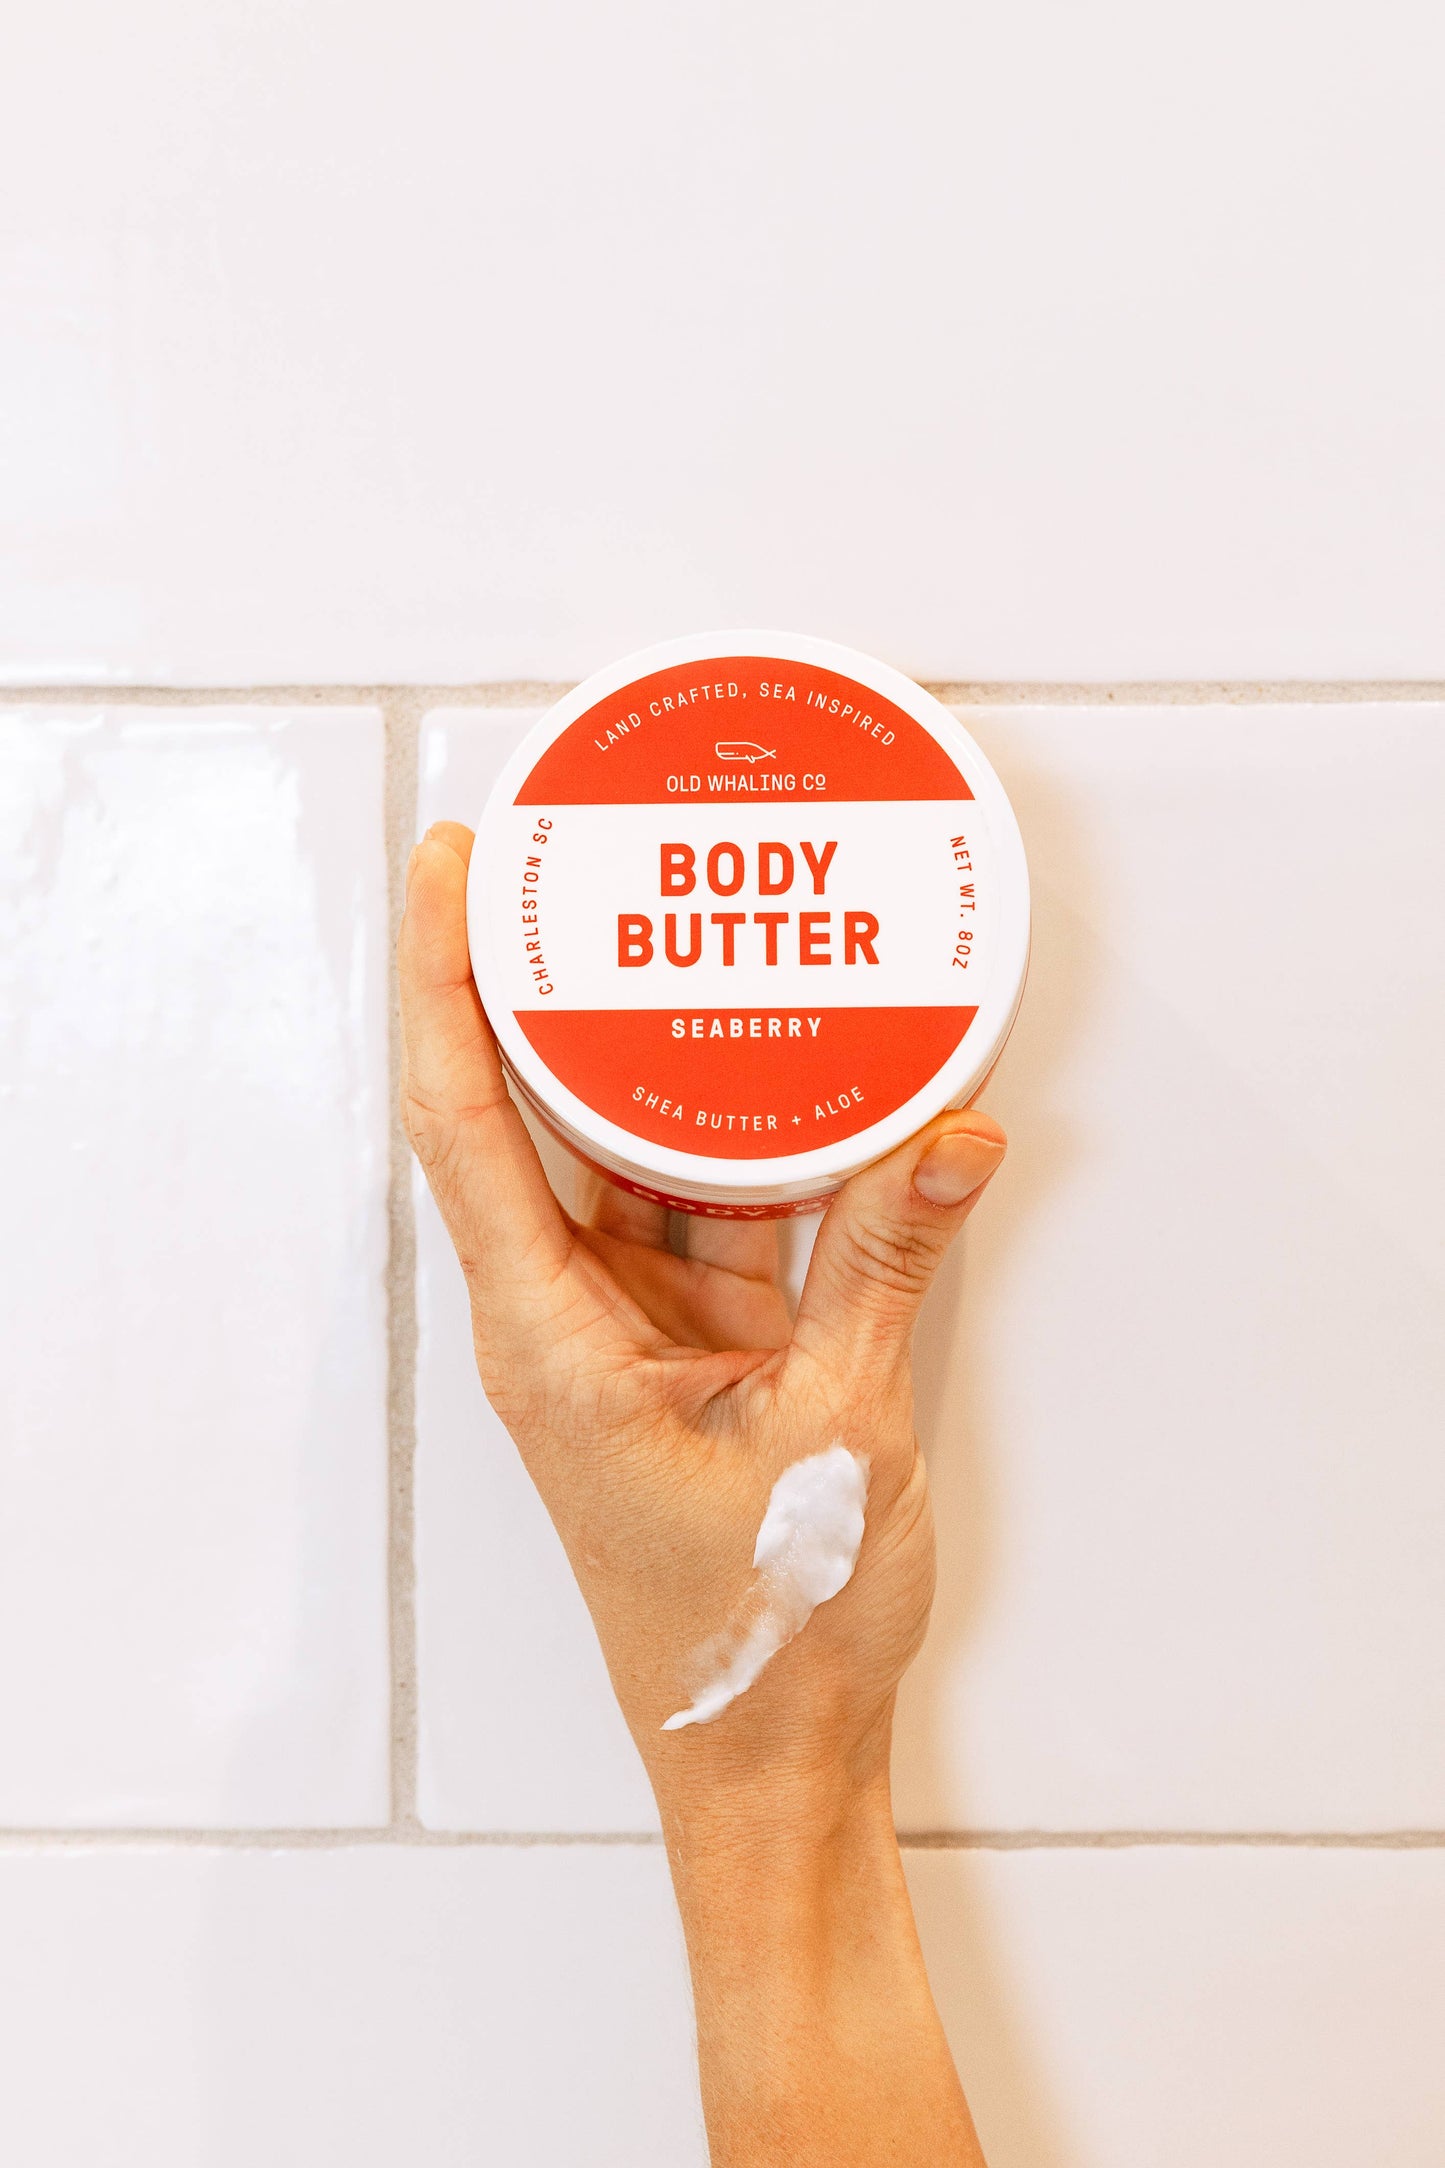 Old Whaling Company - Seaberry Body Butter (8oz)